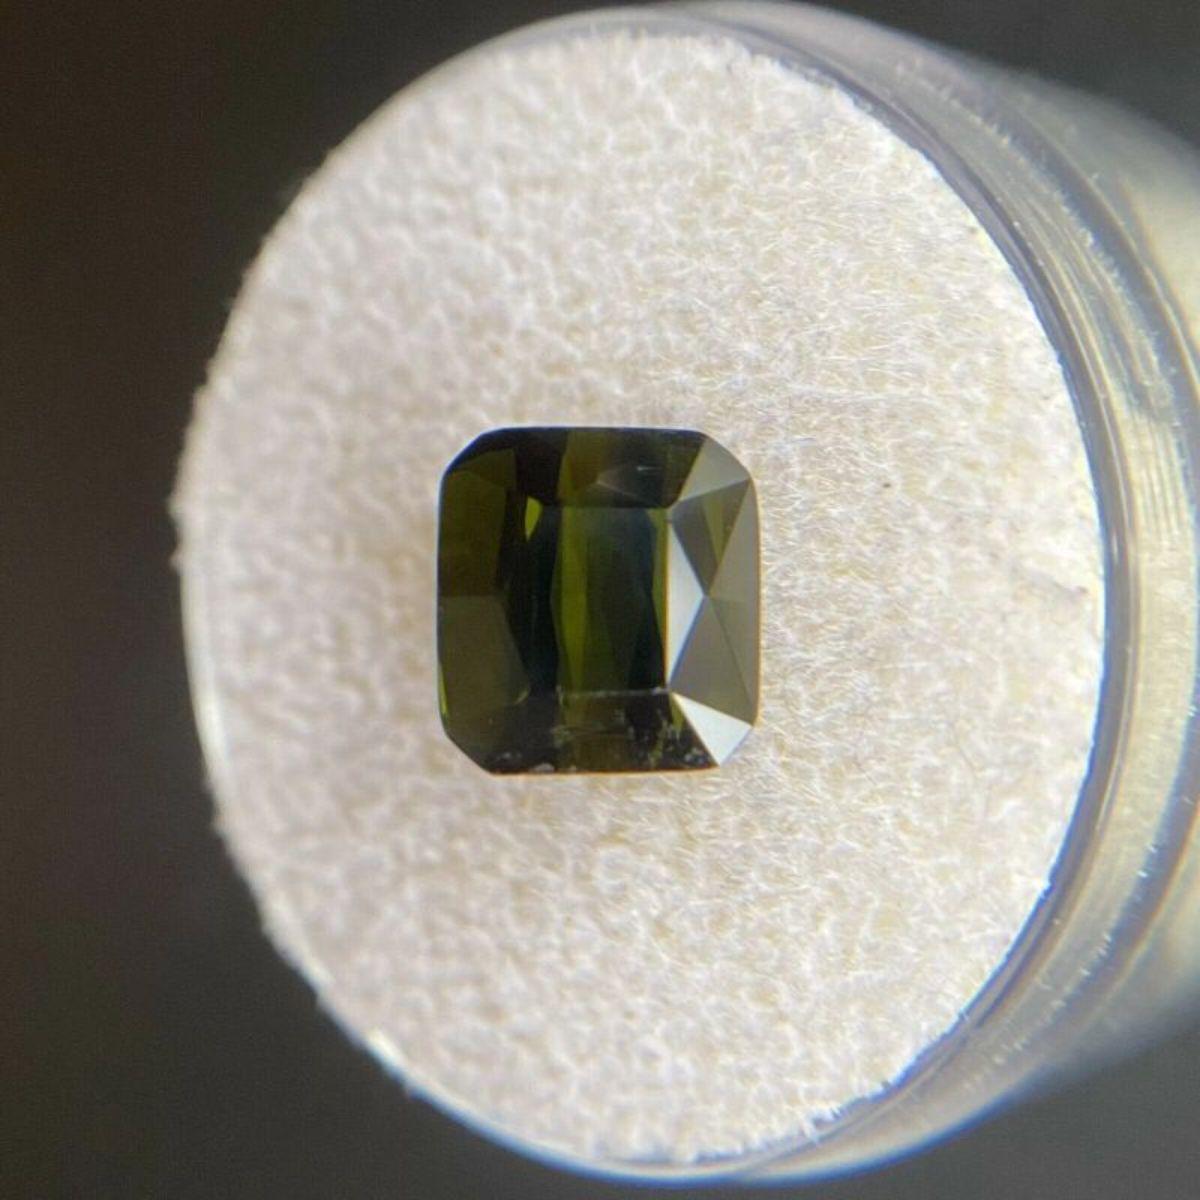 3.11ct Deep Green Tourmaline Fancy Octagon Scissor Emerald Cut 8 x 7.5mm

Natural Deep Green Tourmaline Gemstone. 

3.11 Carat with a beautiful deep green colour and good clarity. Some small natural inclusions visible when looking closely, no breaks